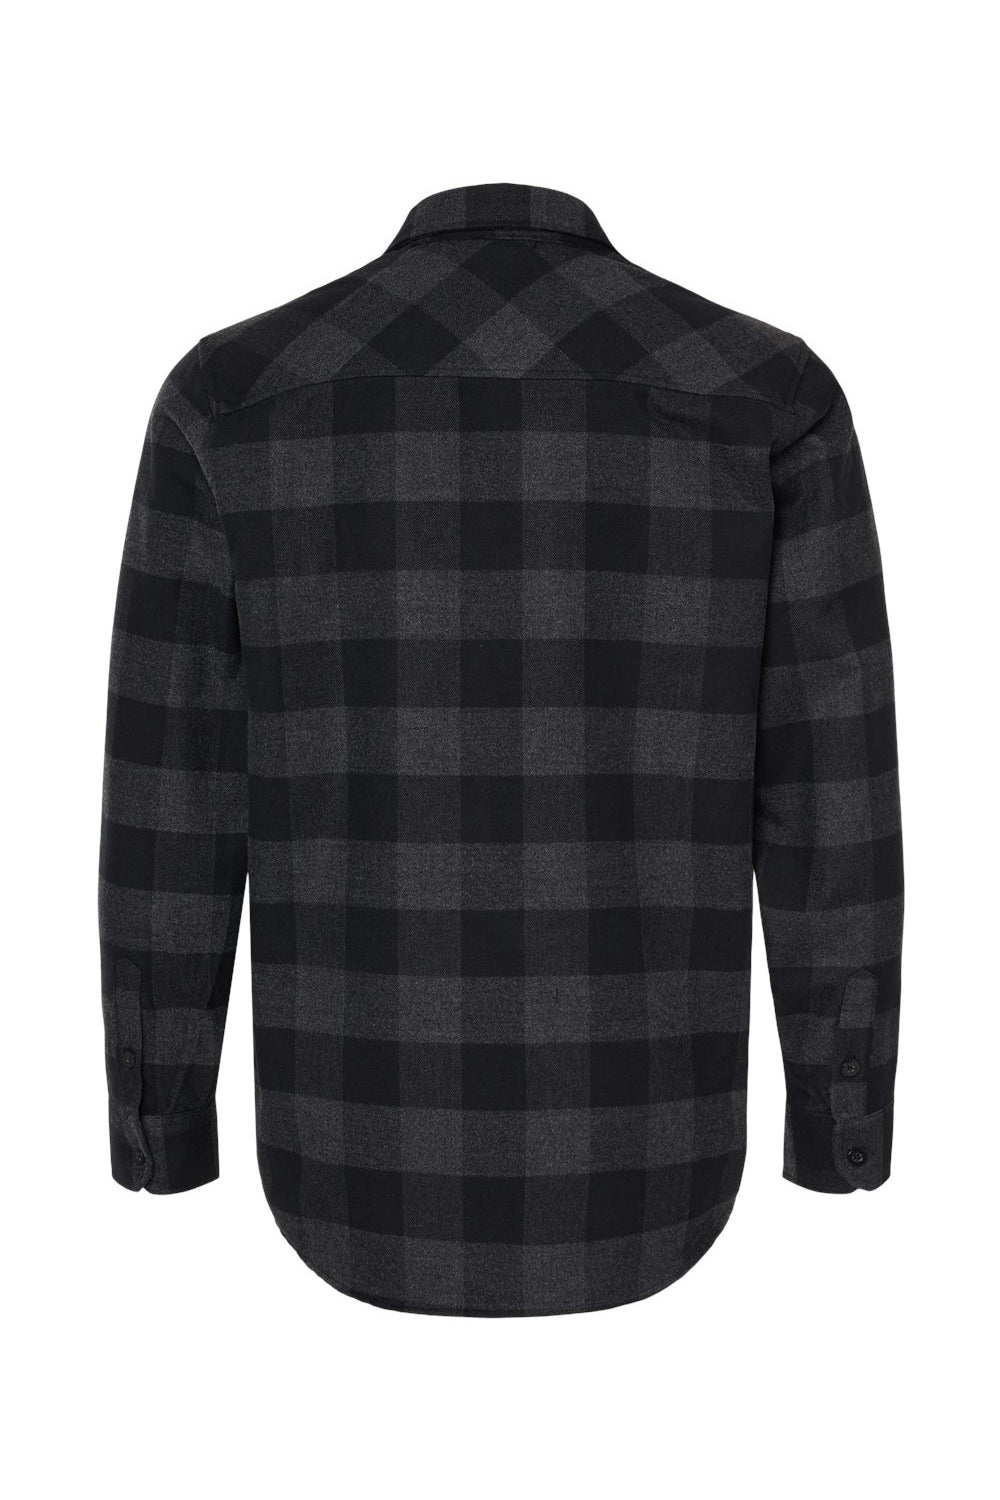 Independent Trading Co. EXP50F Mens Long Sleeve Button Down Flannel Shirt w/ Double Pockets Heather Charcoal Grey/Black Flat Back